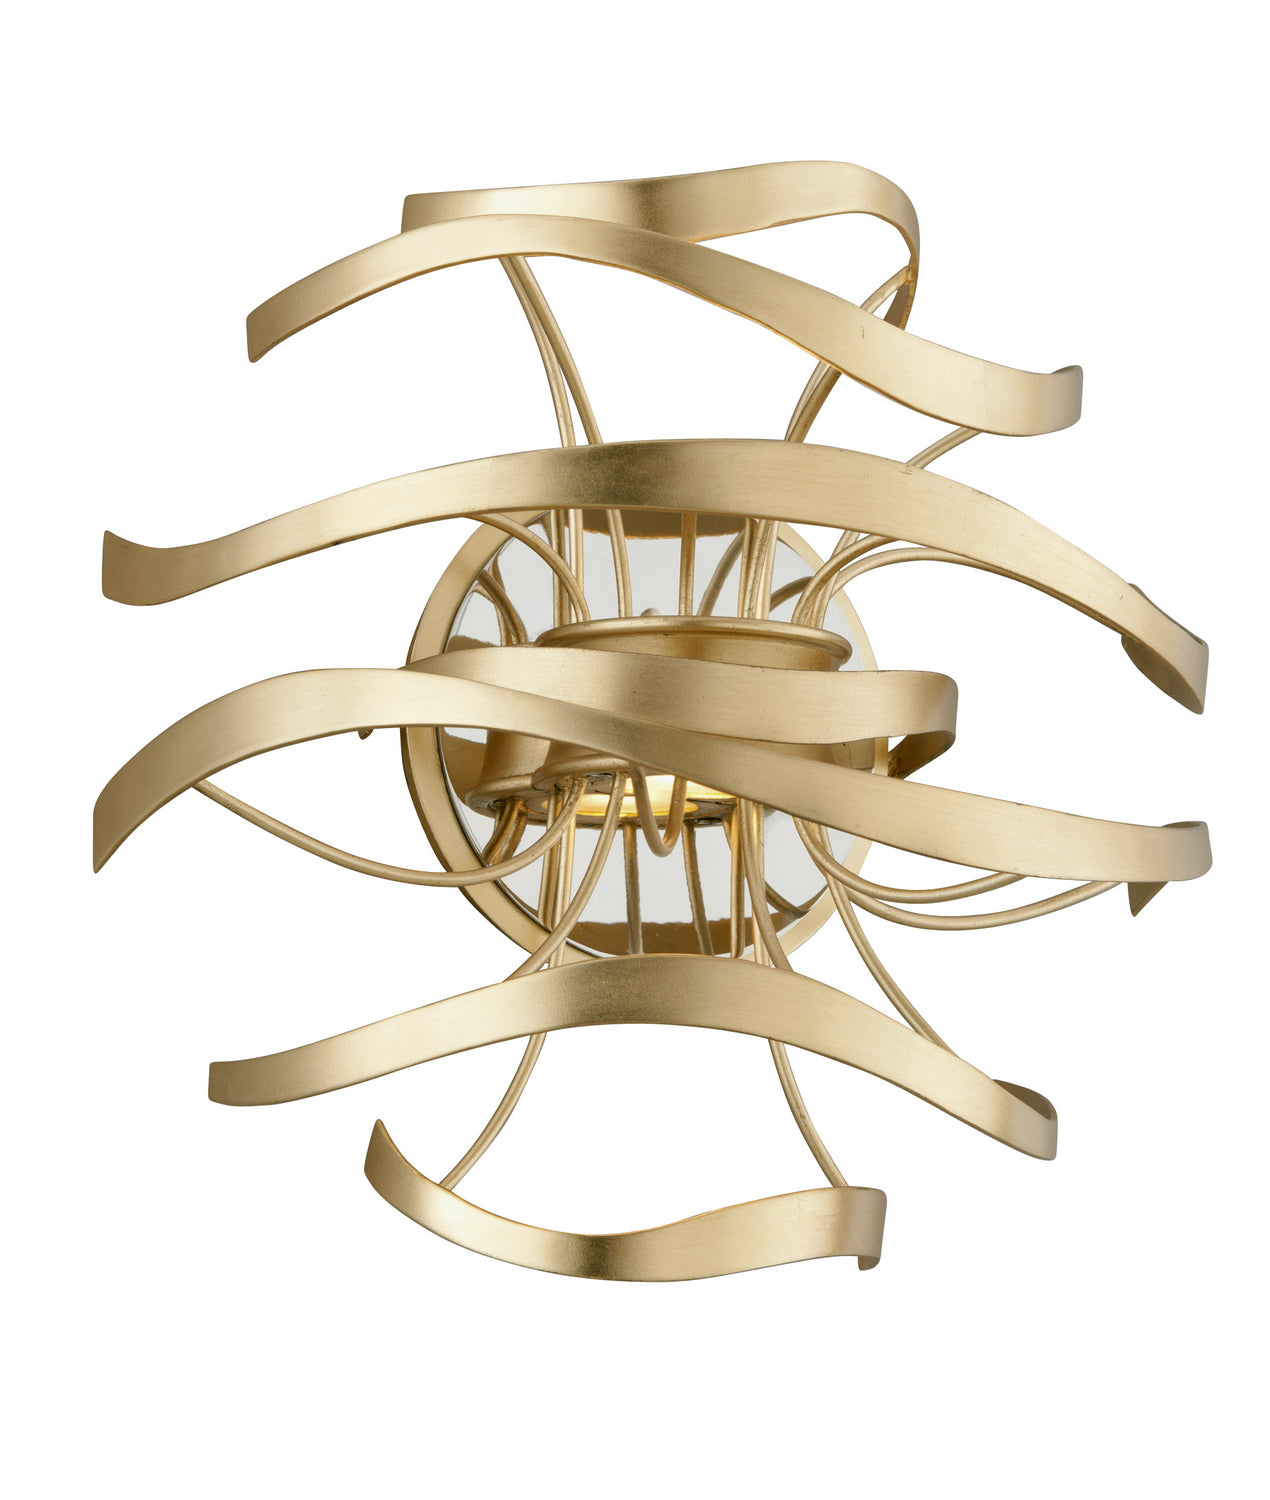 Corbett Lighting - LED Wall Sconce - Calligraphy - Gold Leaf W Polished Stainless- Union Lighting Luminaires Decor